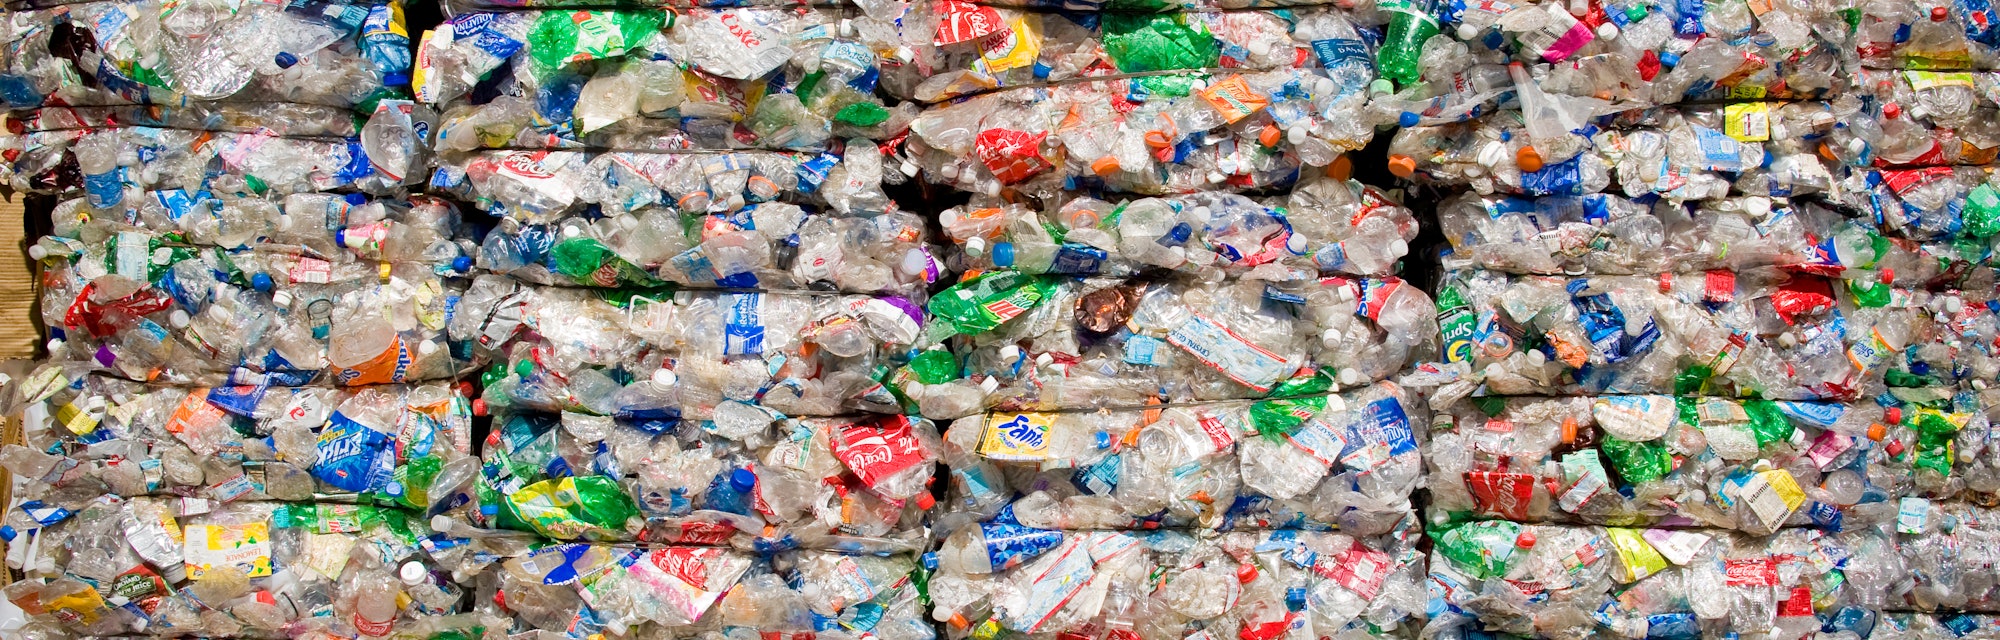 Stacks of compressed plastic products for recycling